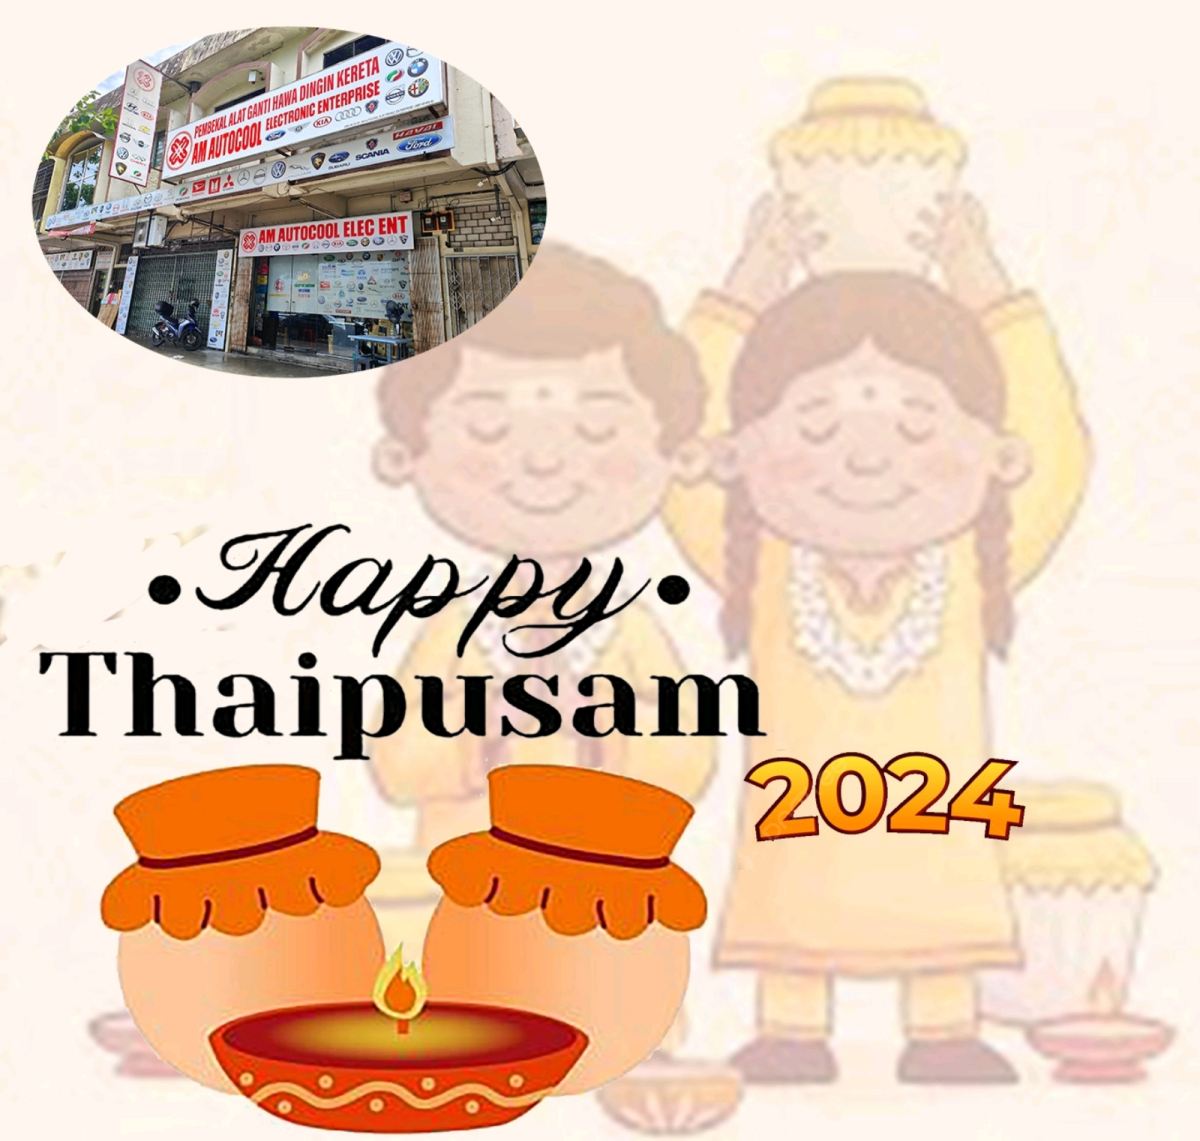 25/01/2024 Happy Thaiposam, our company business hour as usual ~

#amautocool.com
#caraircondparts
25/01/2024 Happy Thaiposam, our company business hour as usual ~